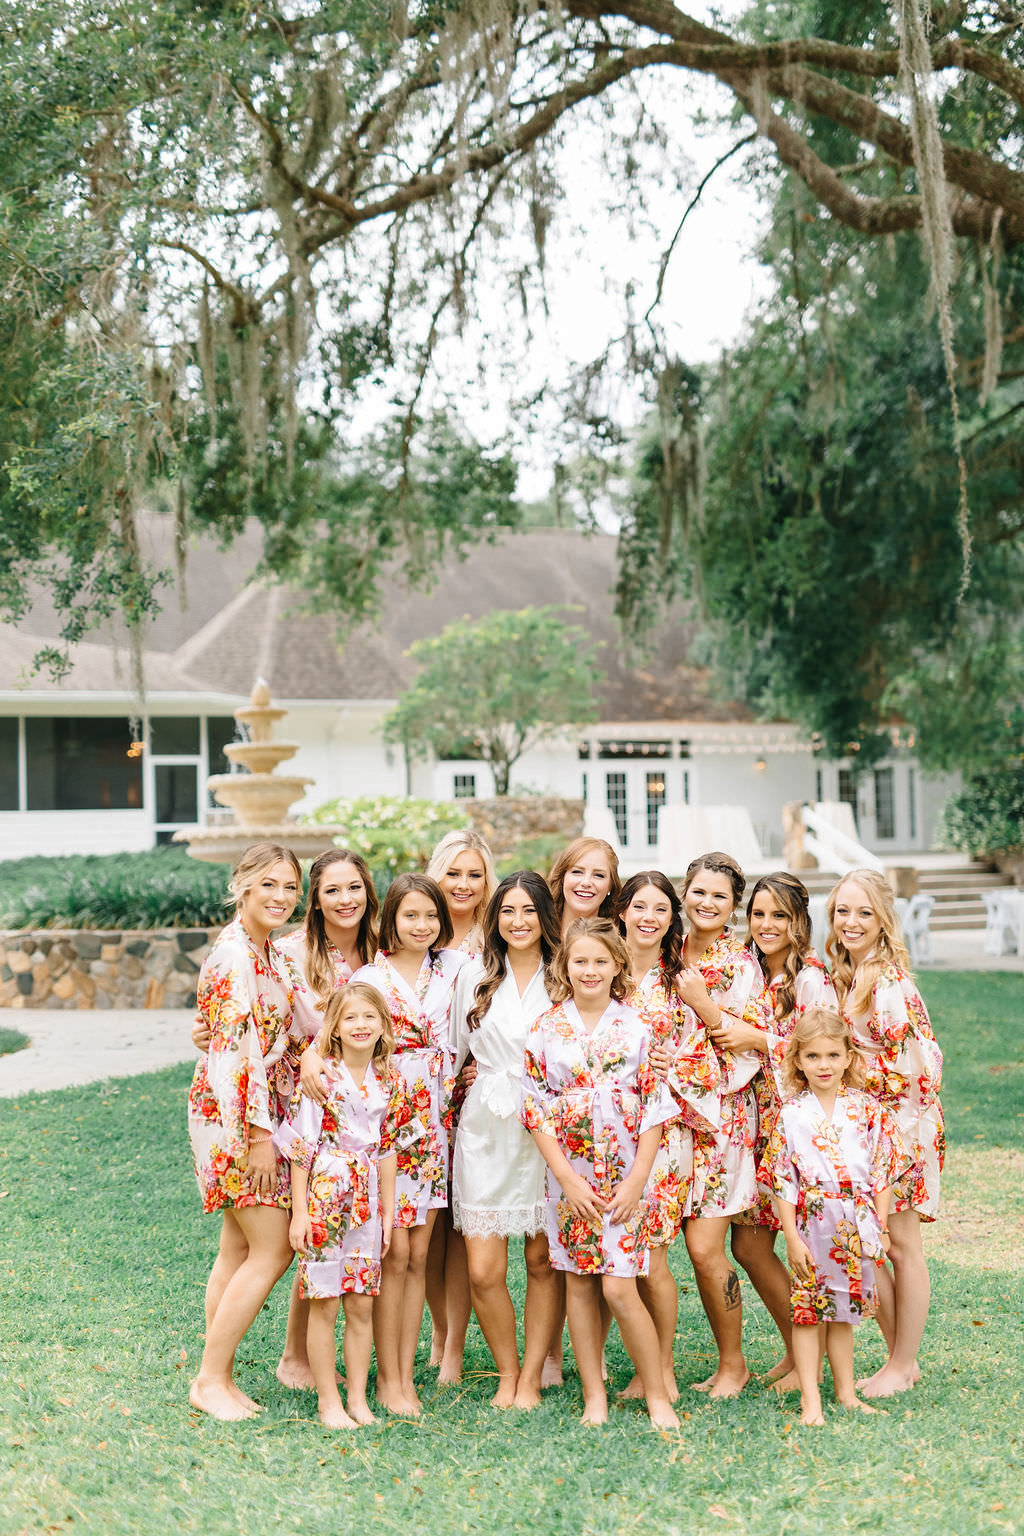 Outdoor Bride and Bridesmaids Getting Ready Portrait in Pink Floral Silk Robes | Tampa Bay Venue The Lange Farm